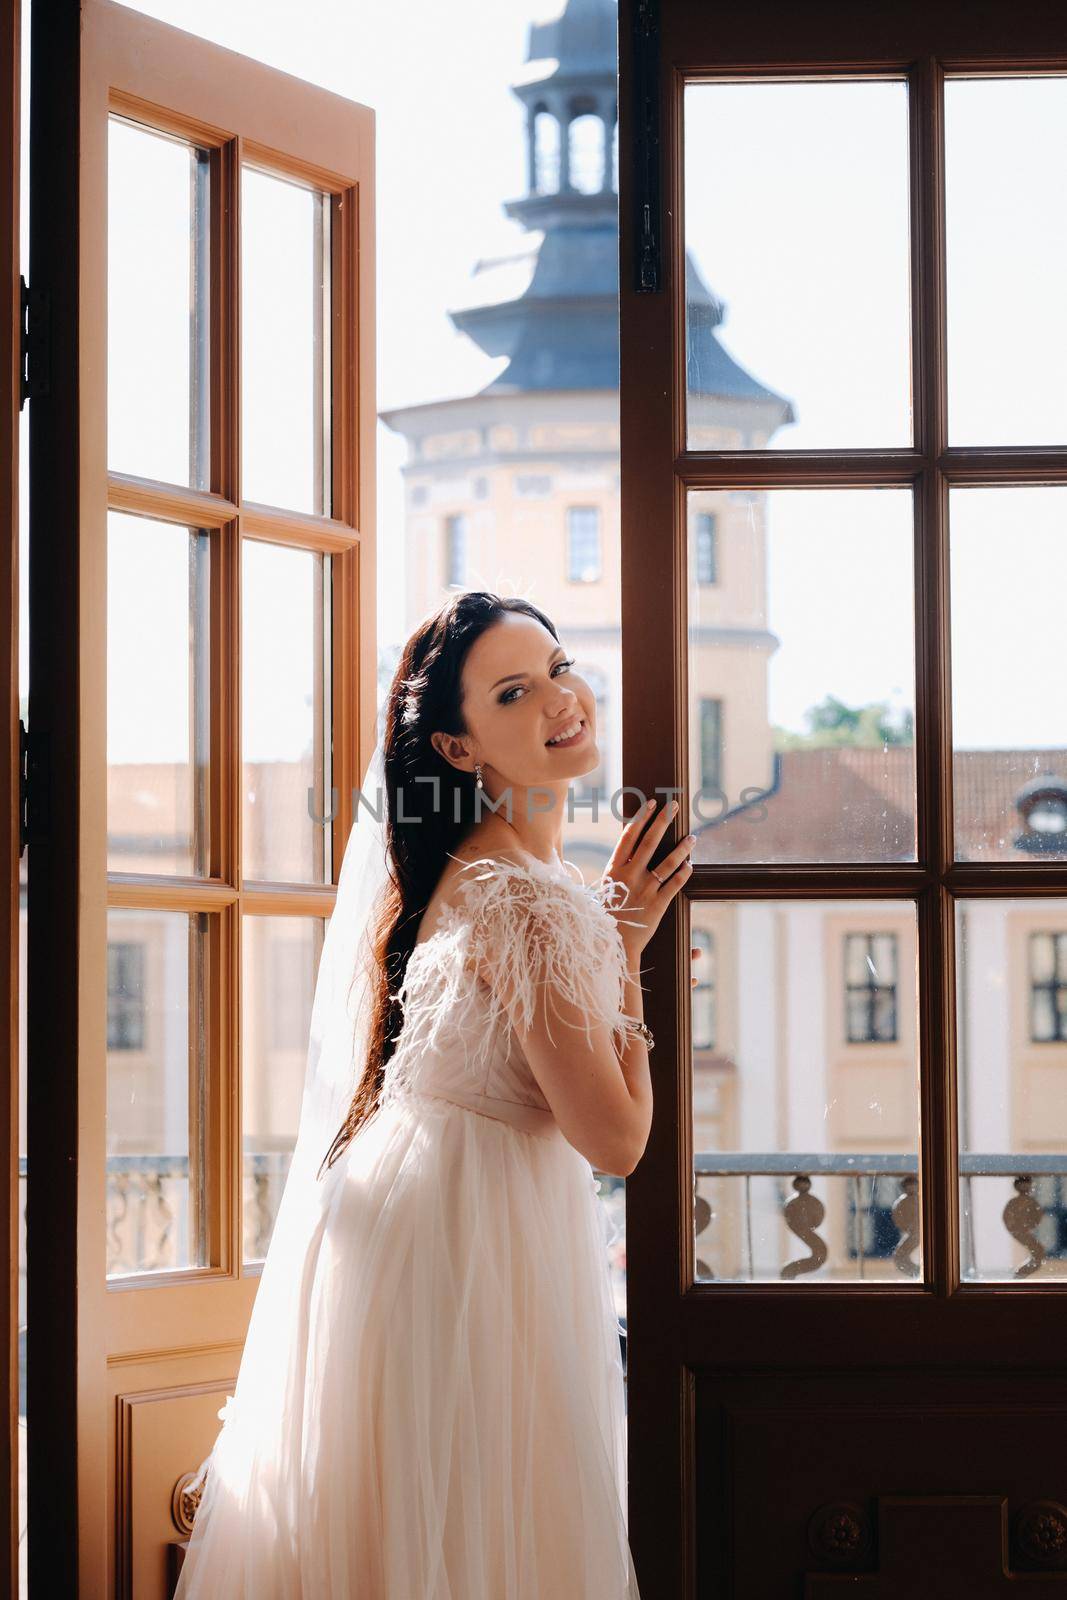 An elegant bride on the balcony of an ancient castle in the city of Nesvizh.